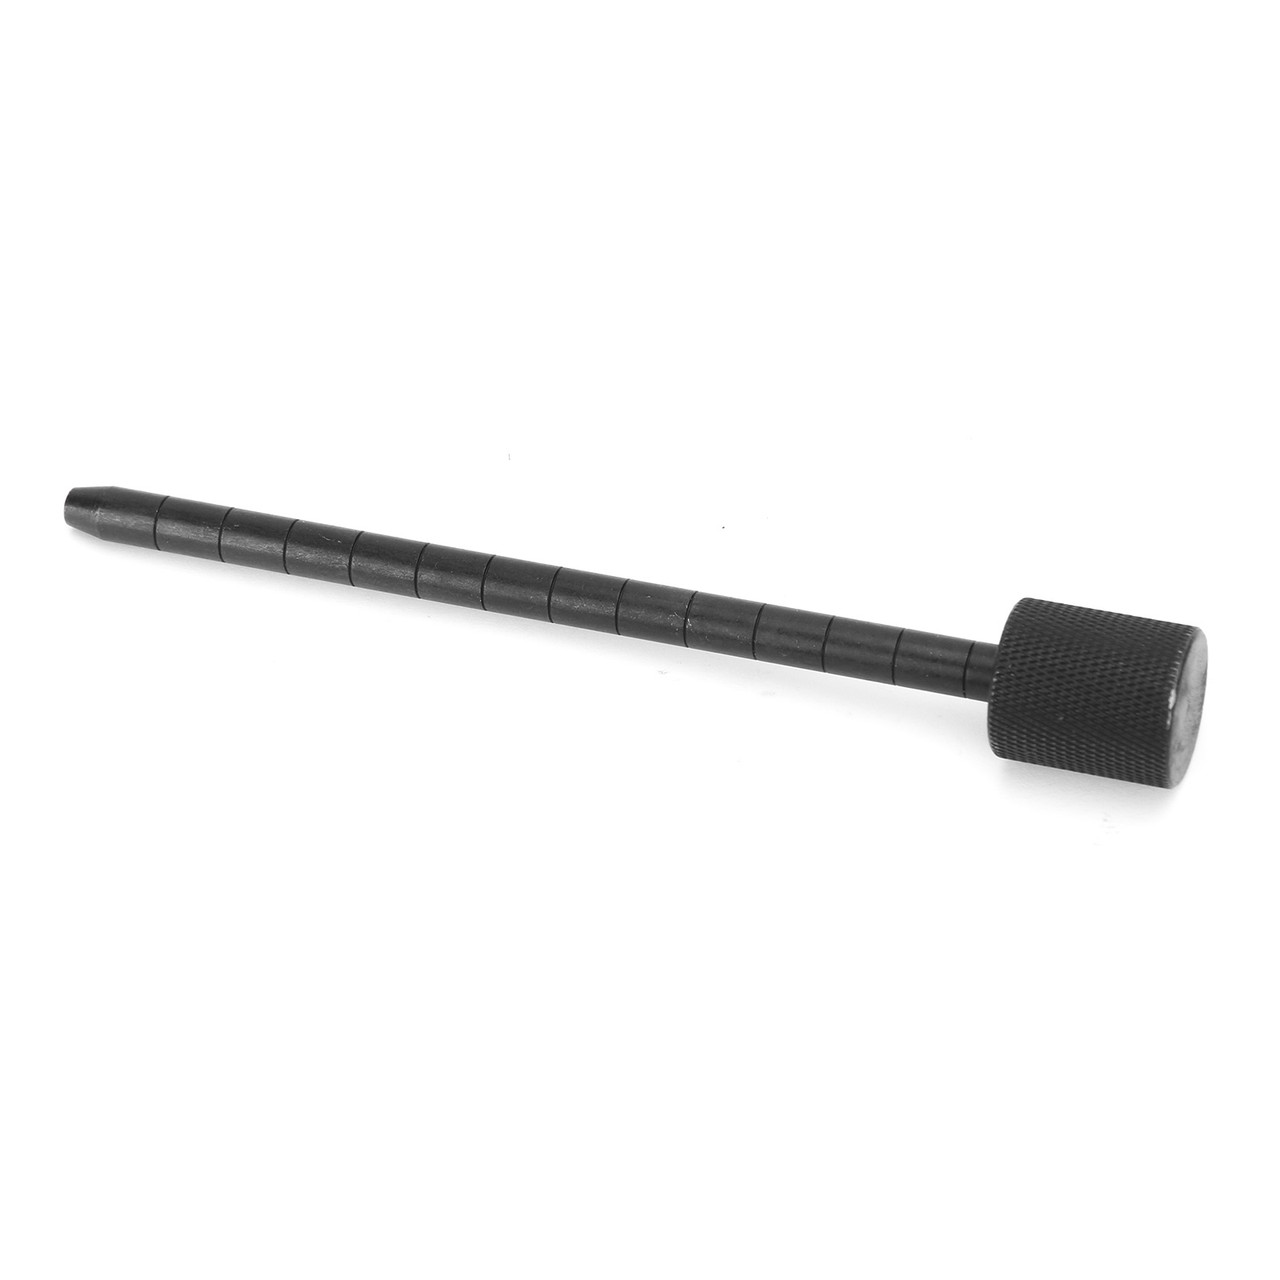 1017 Transmission Dipstick Tool For Chrysler 6F24 Automatic Trans ...